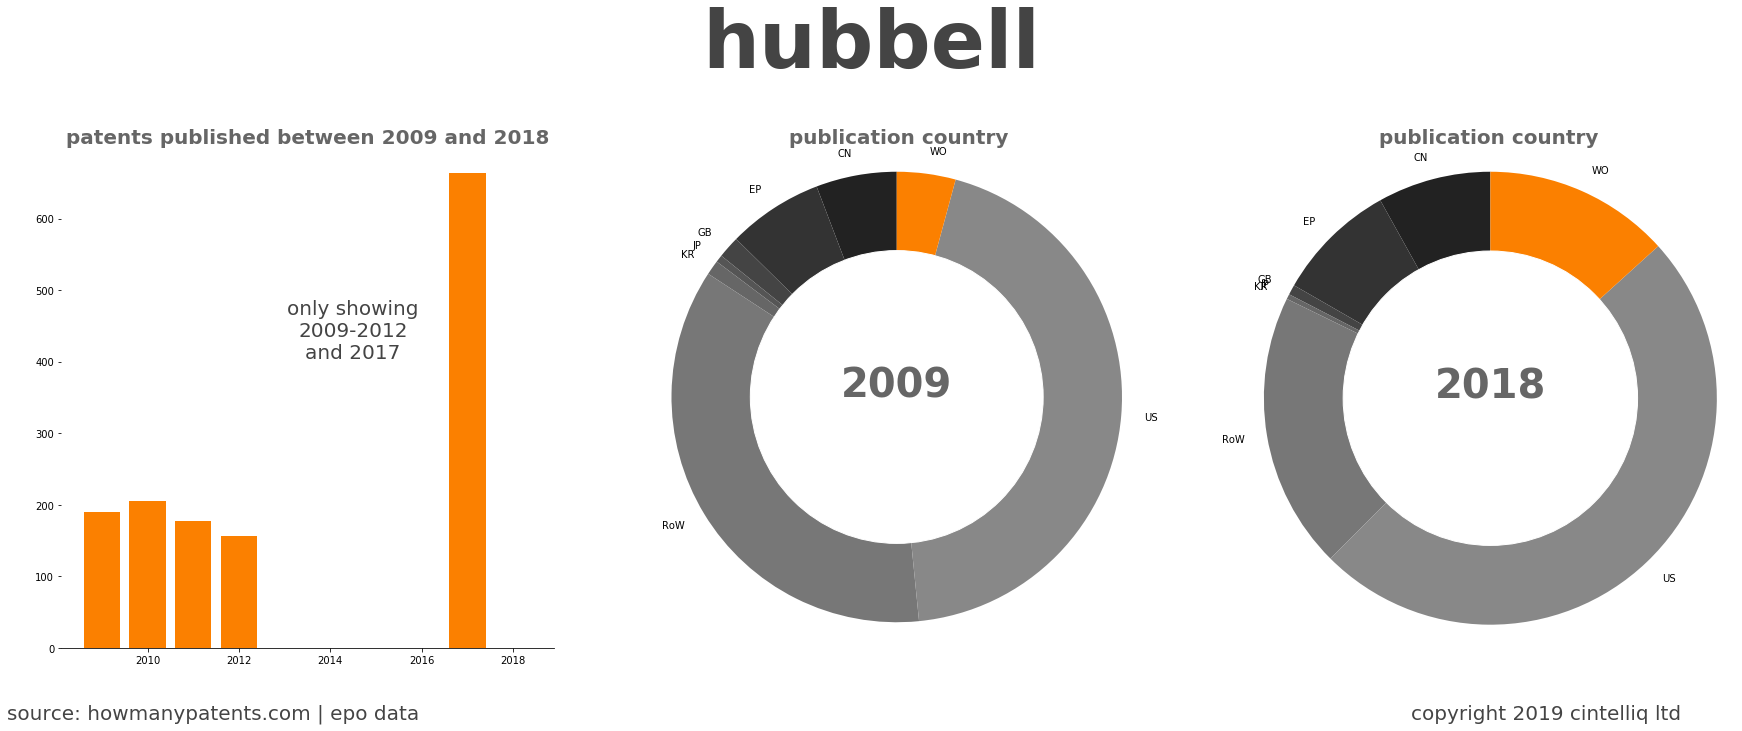 summary of patents for Hubbell